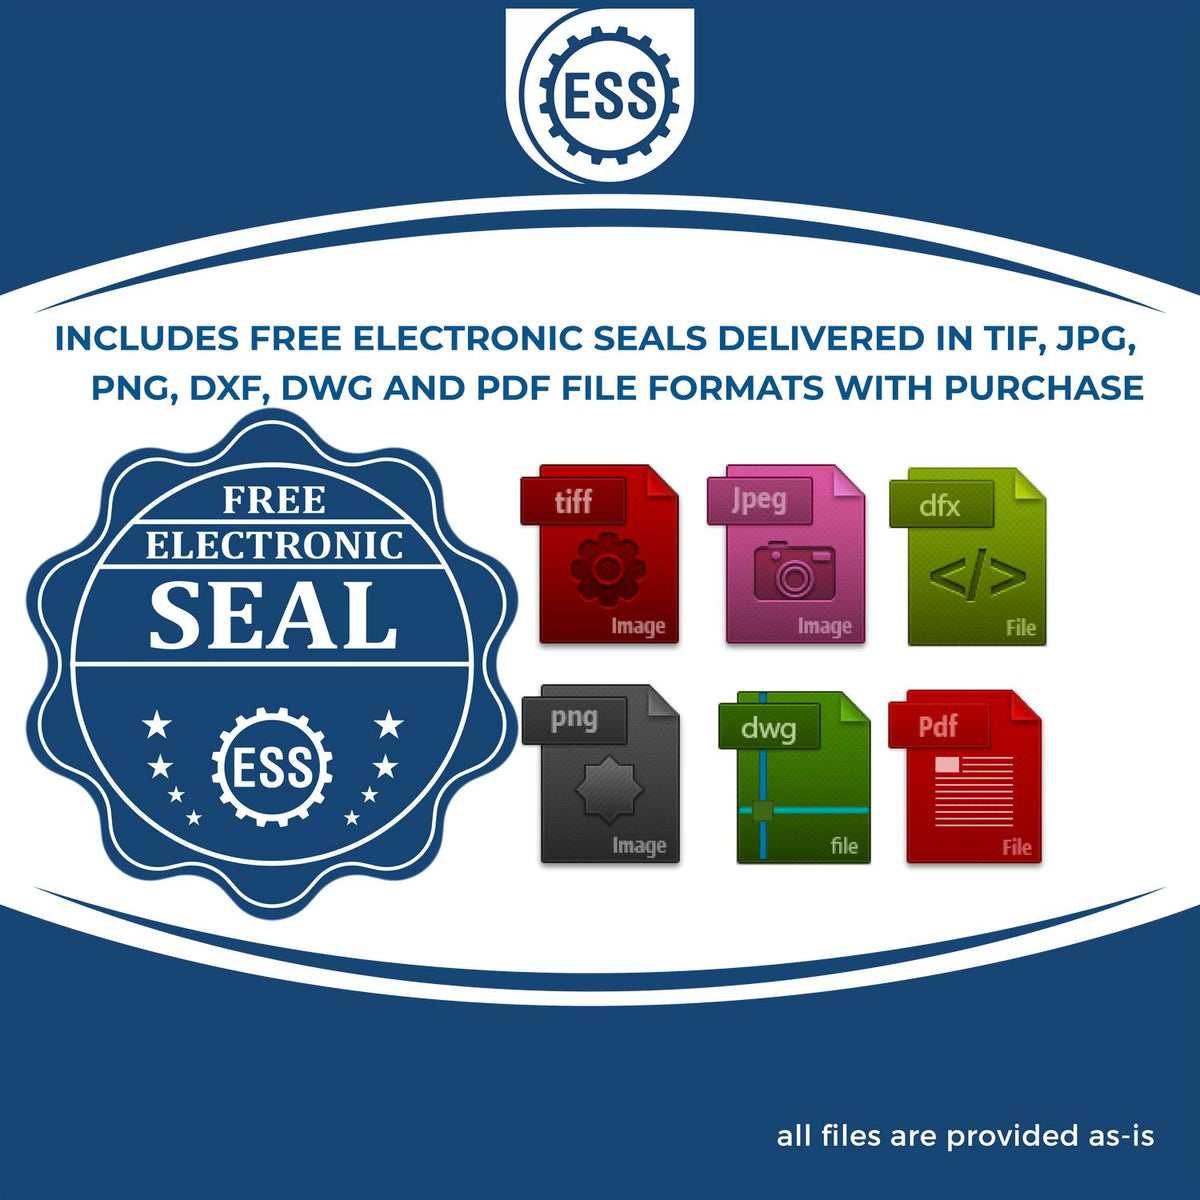 An infographic for the free electronic seal for the Hybrid Florida Landscape Architect Seal illustrating the different file type icons such as DXF, DWG, TIF, JPG and PNG.